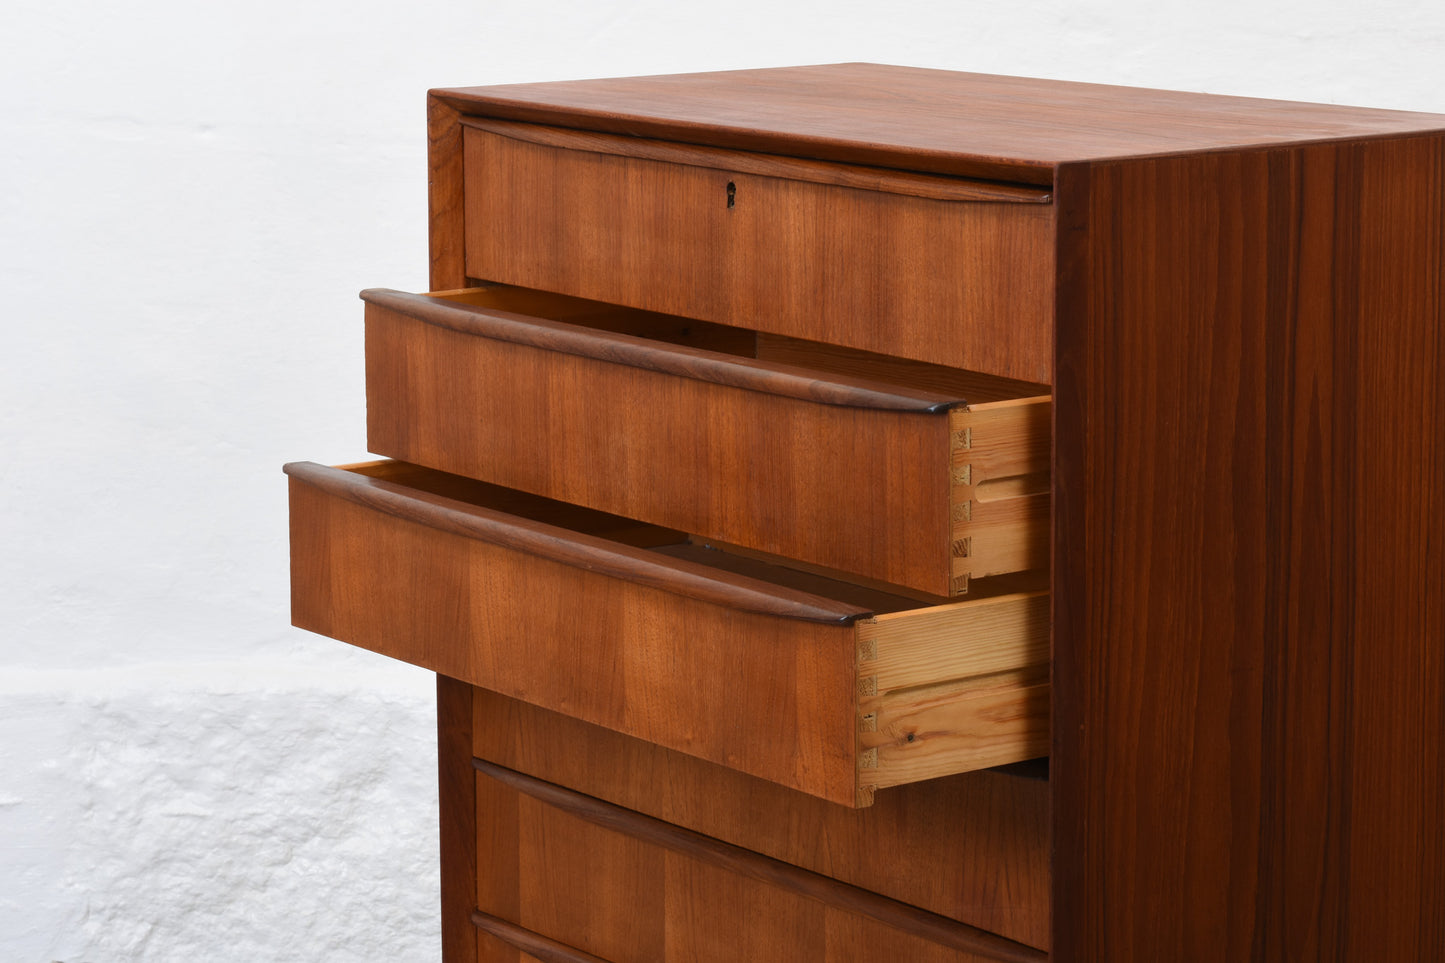 1960s teak chest of drawers with lipped handles no. 1